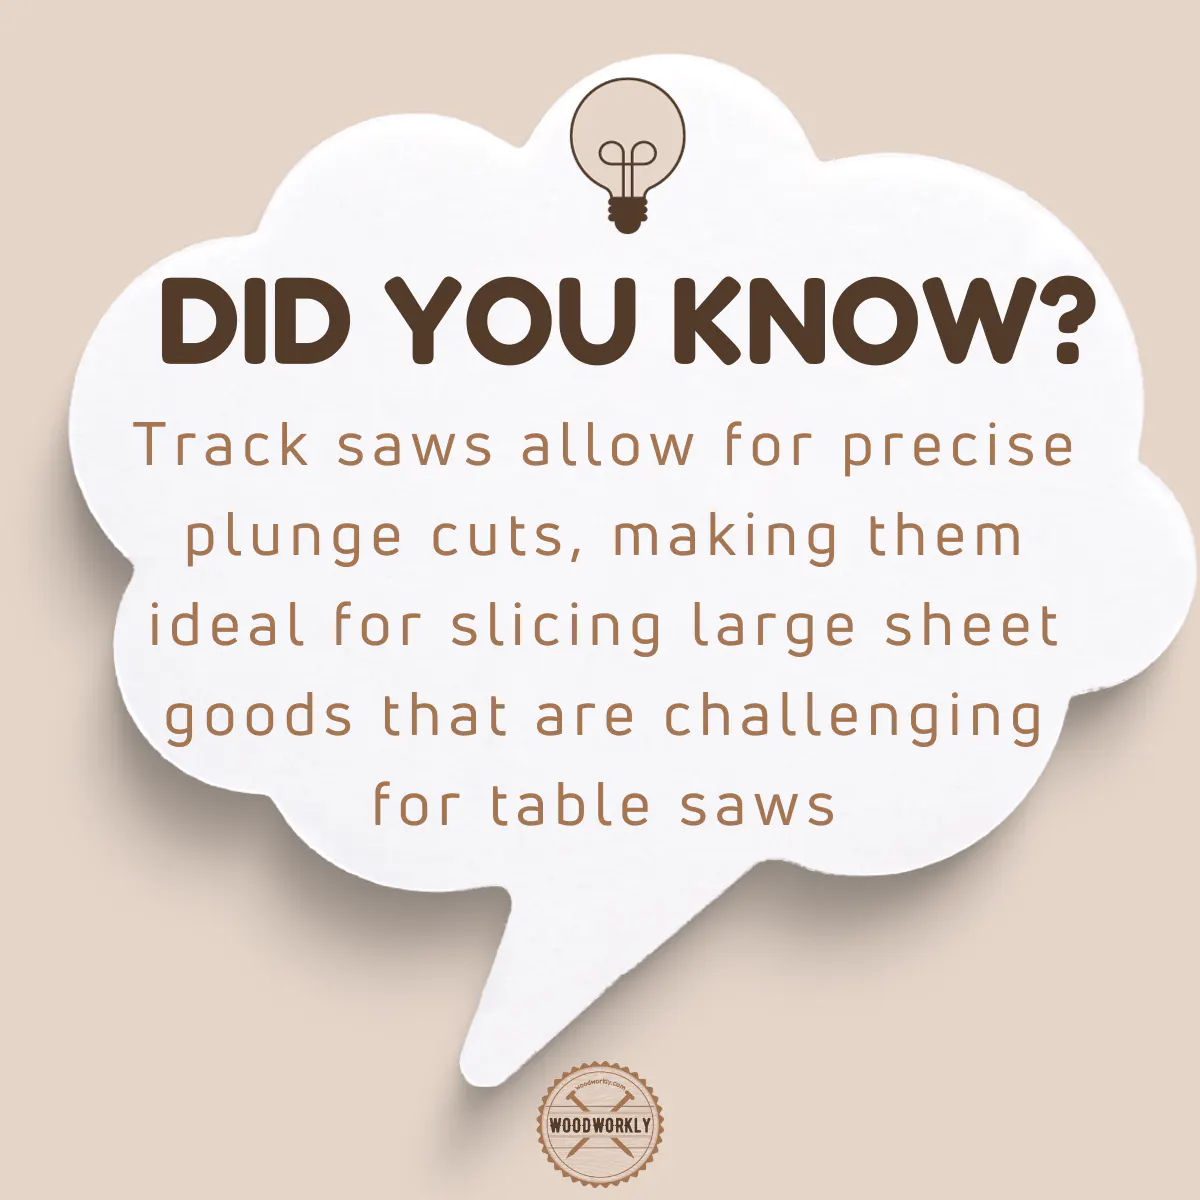 Did you know fact about Track Saw